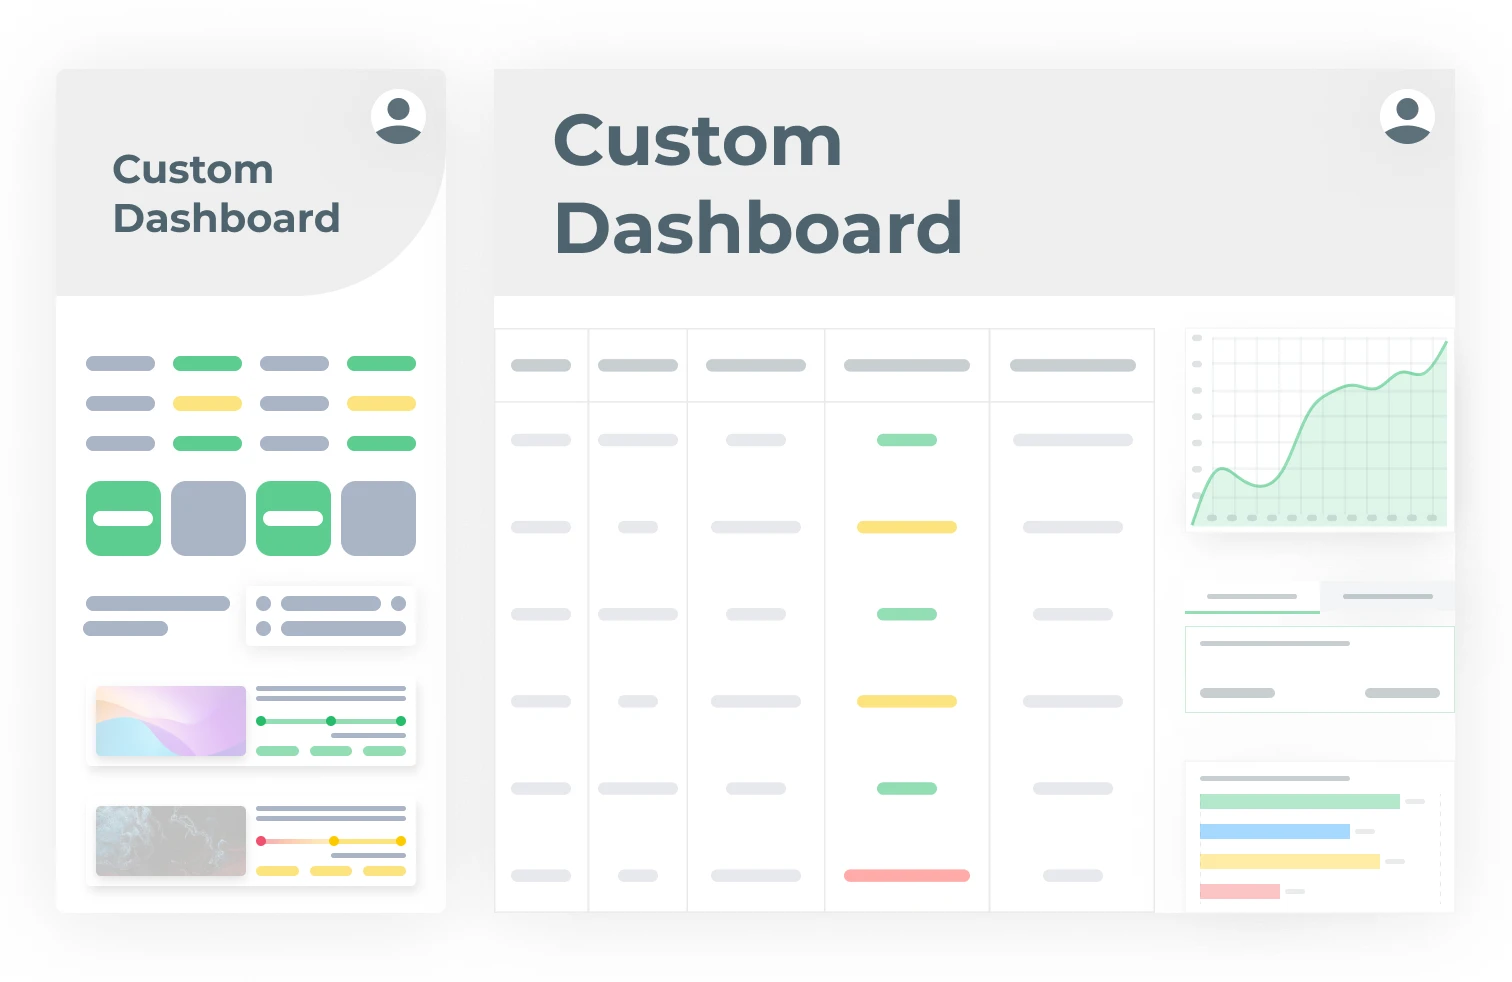 Build your own customer onboarding dashboard now